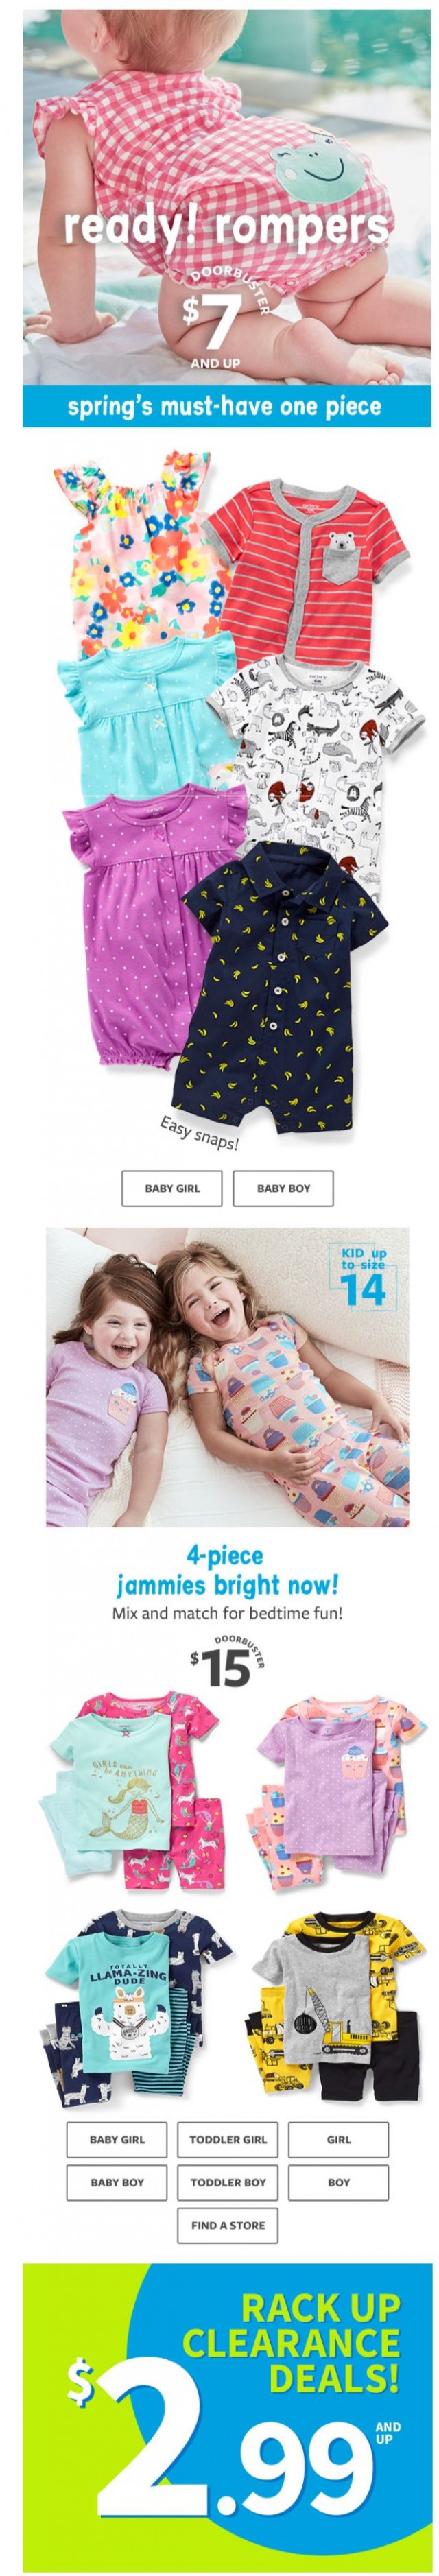 Coupon for: carter's - Romp and roll! $7 and up rompers!